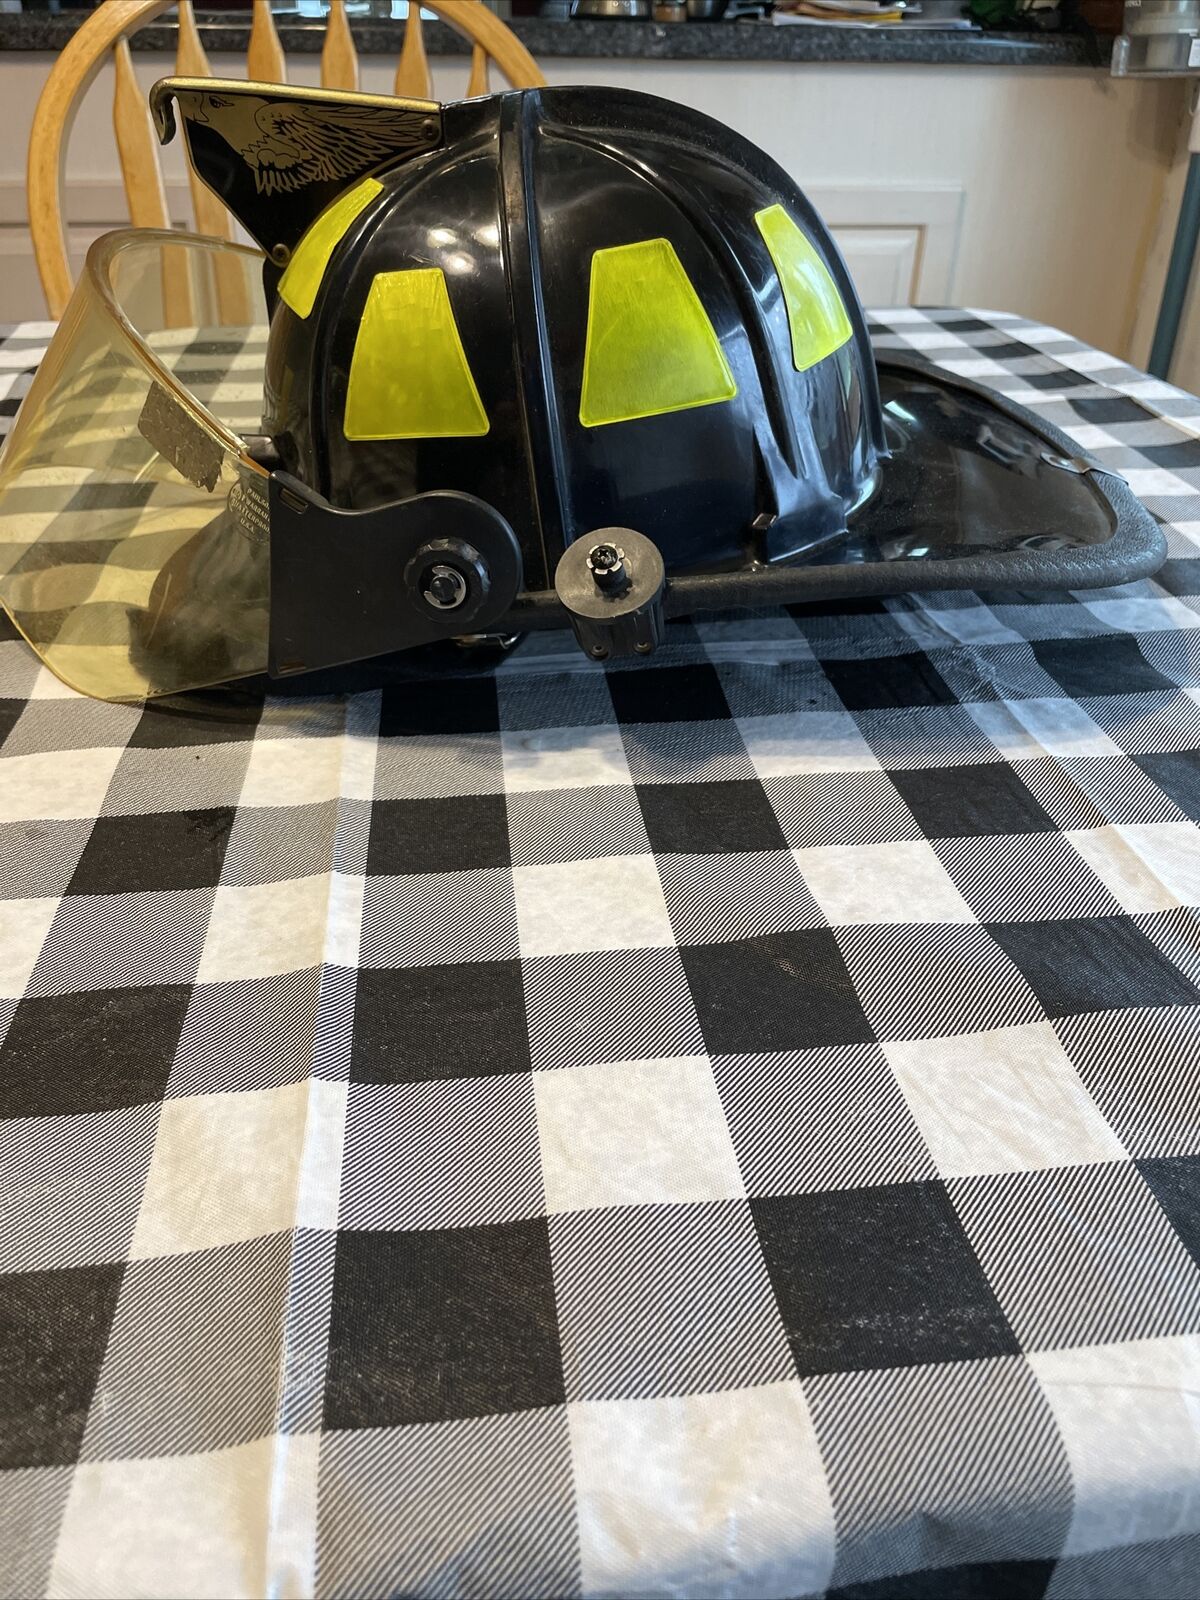 Great condition Cairns 880 traditional fire helmet